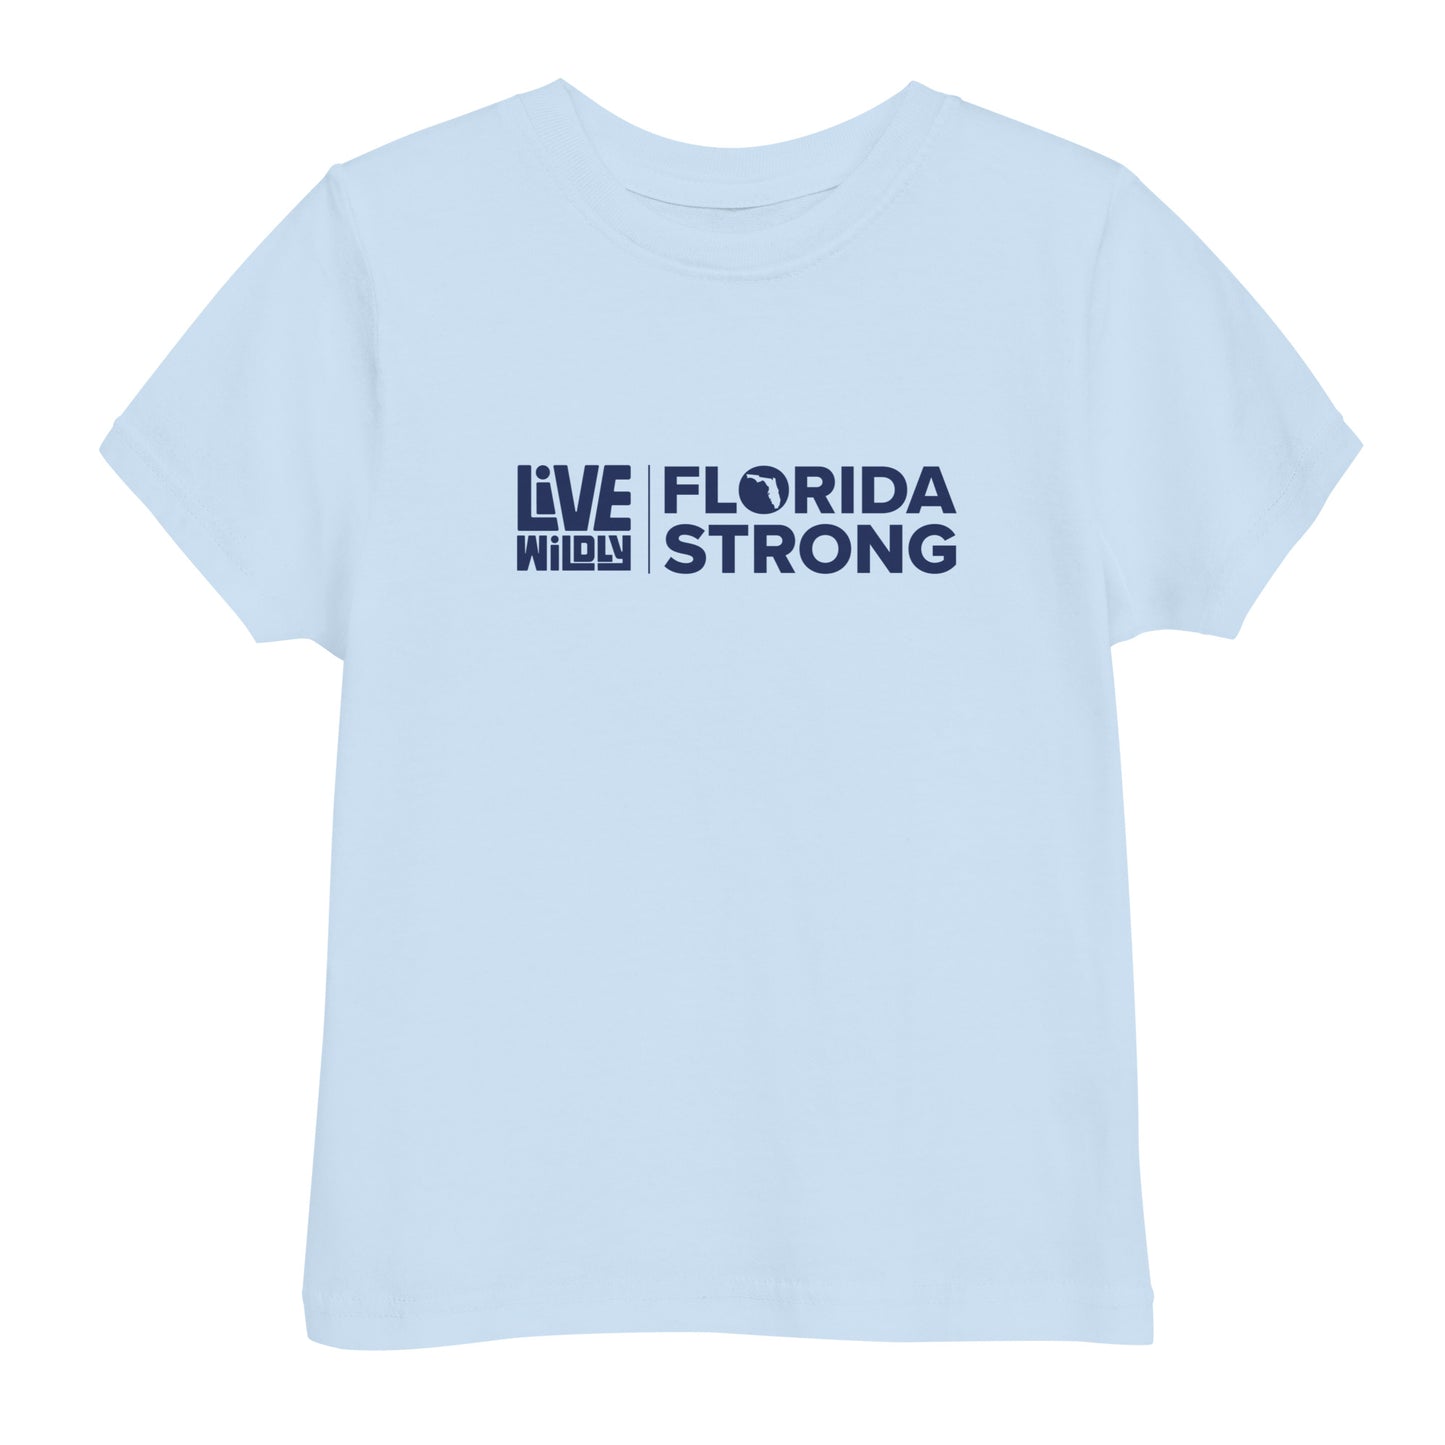 Florida Strong - Toddler Tee - Light Blue Front - Live Wildly 